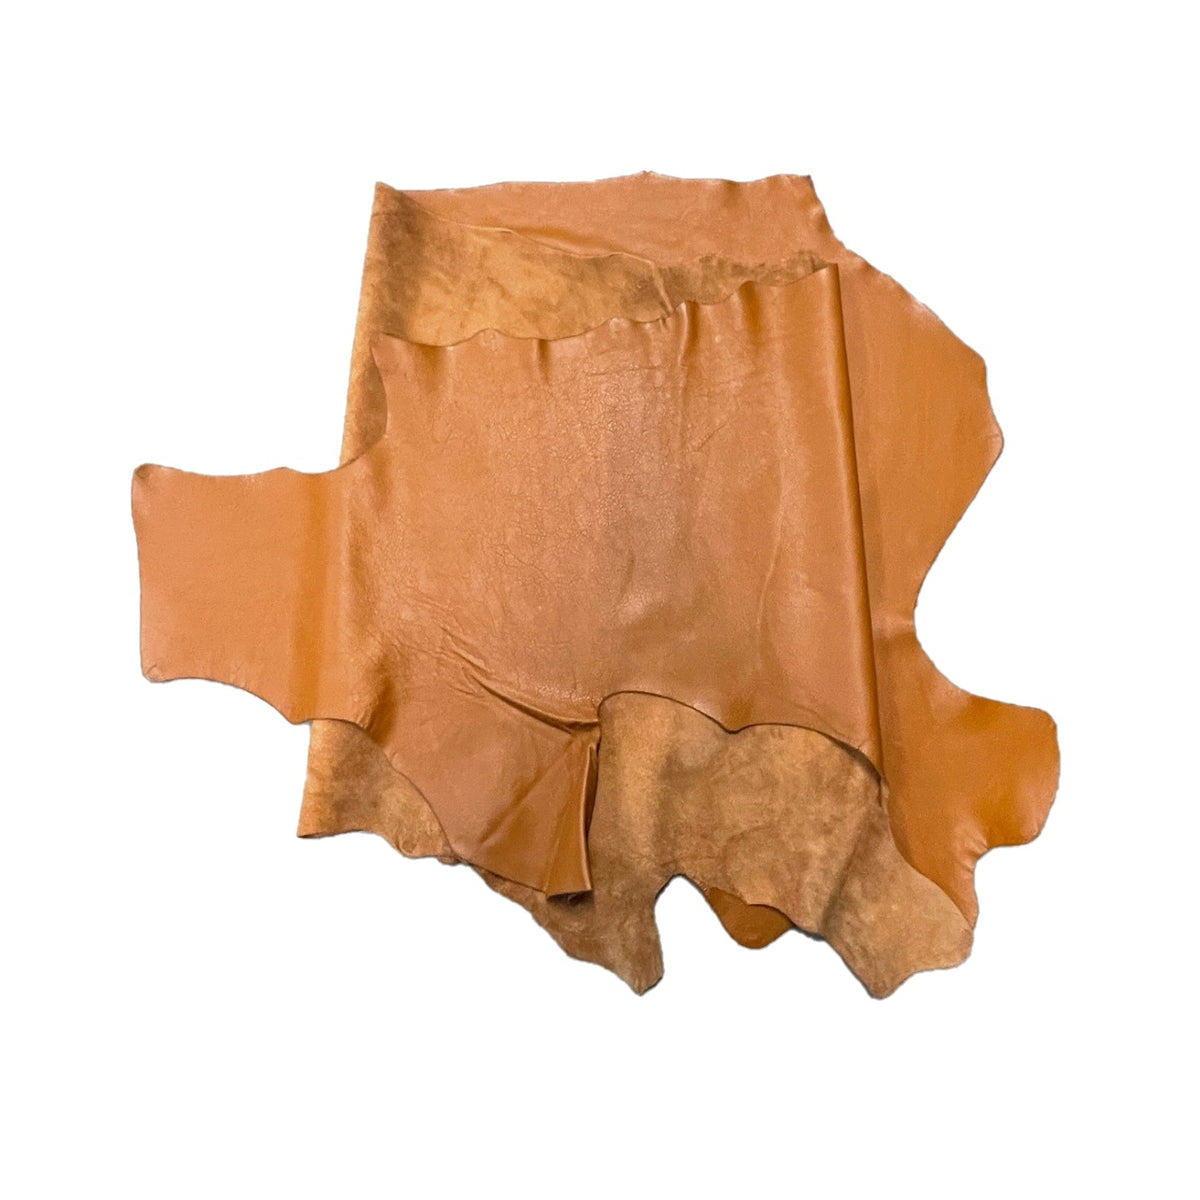 Whisky Nappa Cow Side | 1.4 - 1.6mm | 24 sq.ft | From $275 ea.